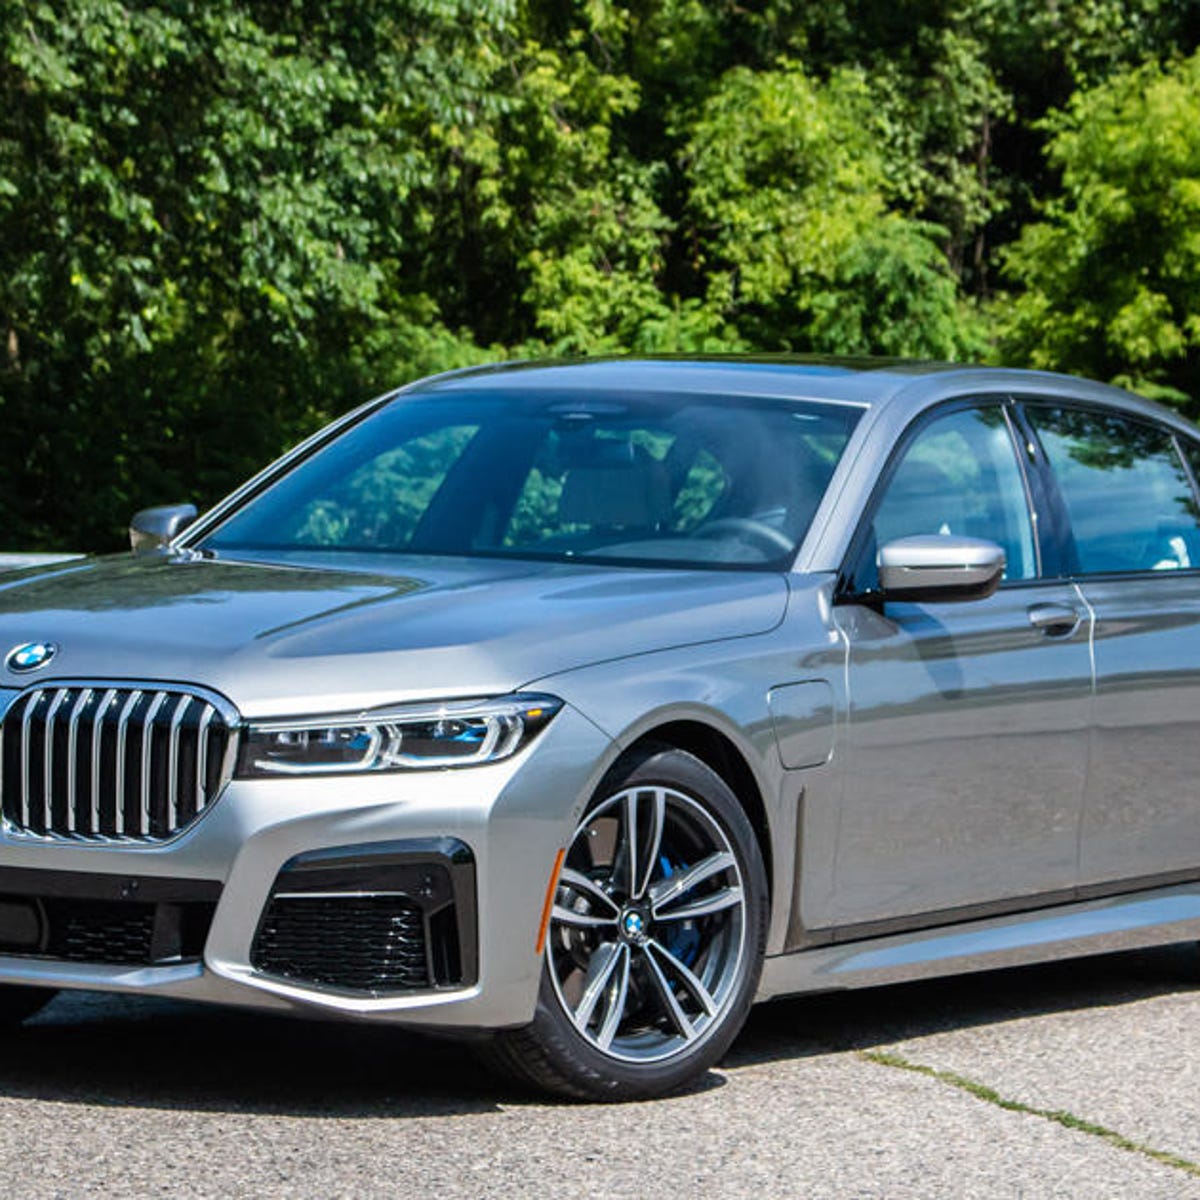 2020 BMW 745e xDrive review: A plush plug-in with power and presence - CNET